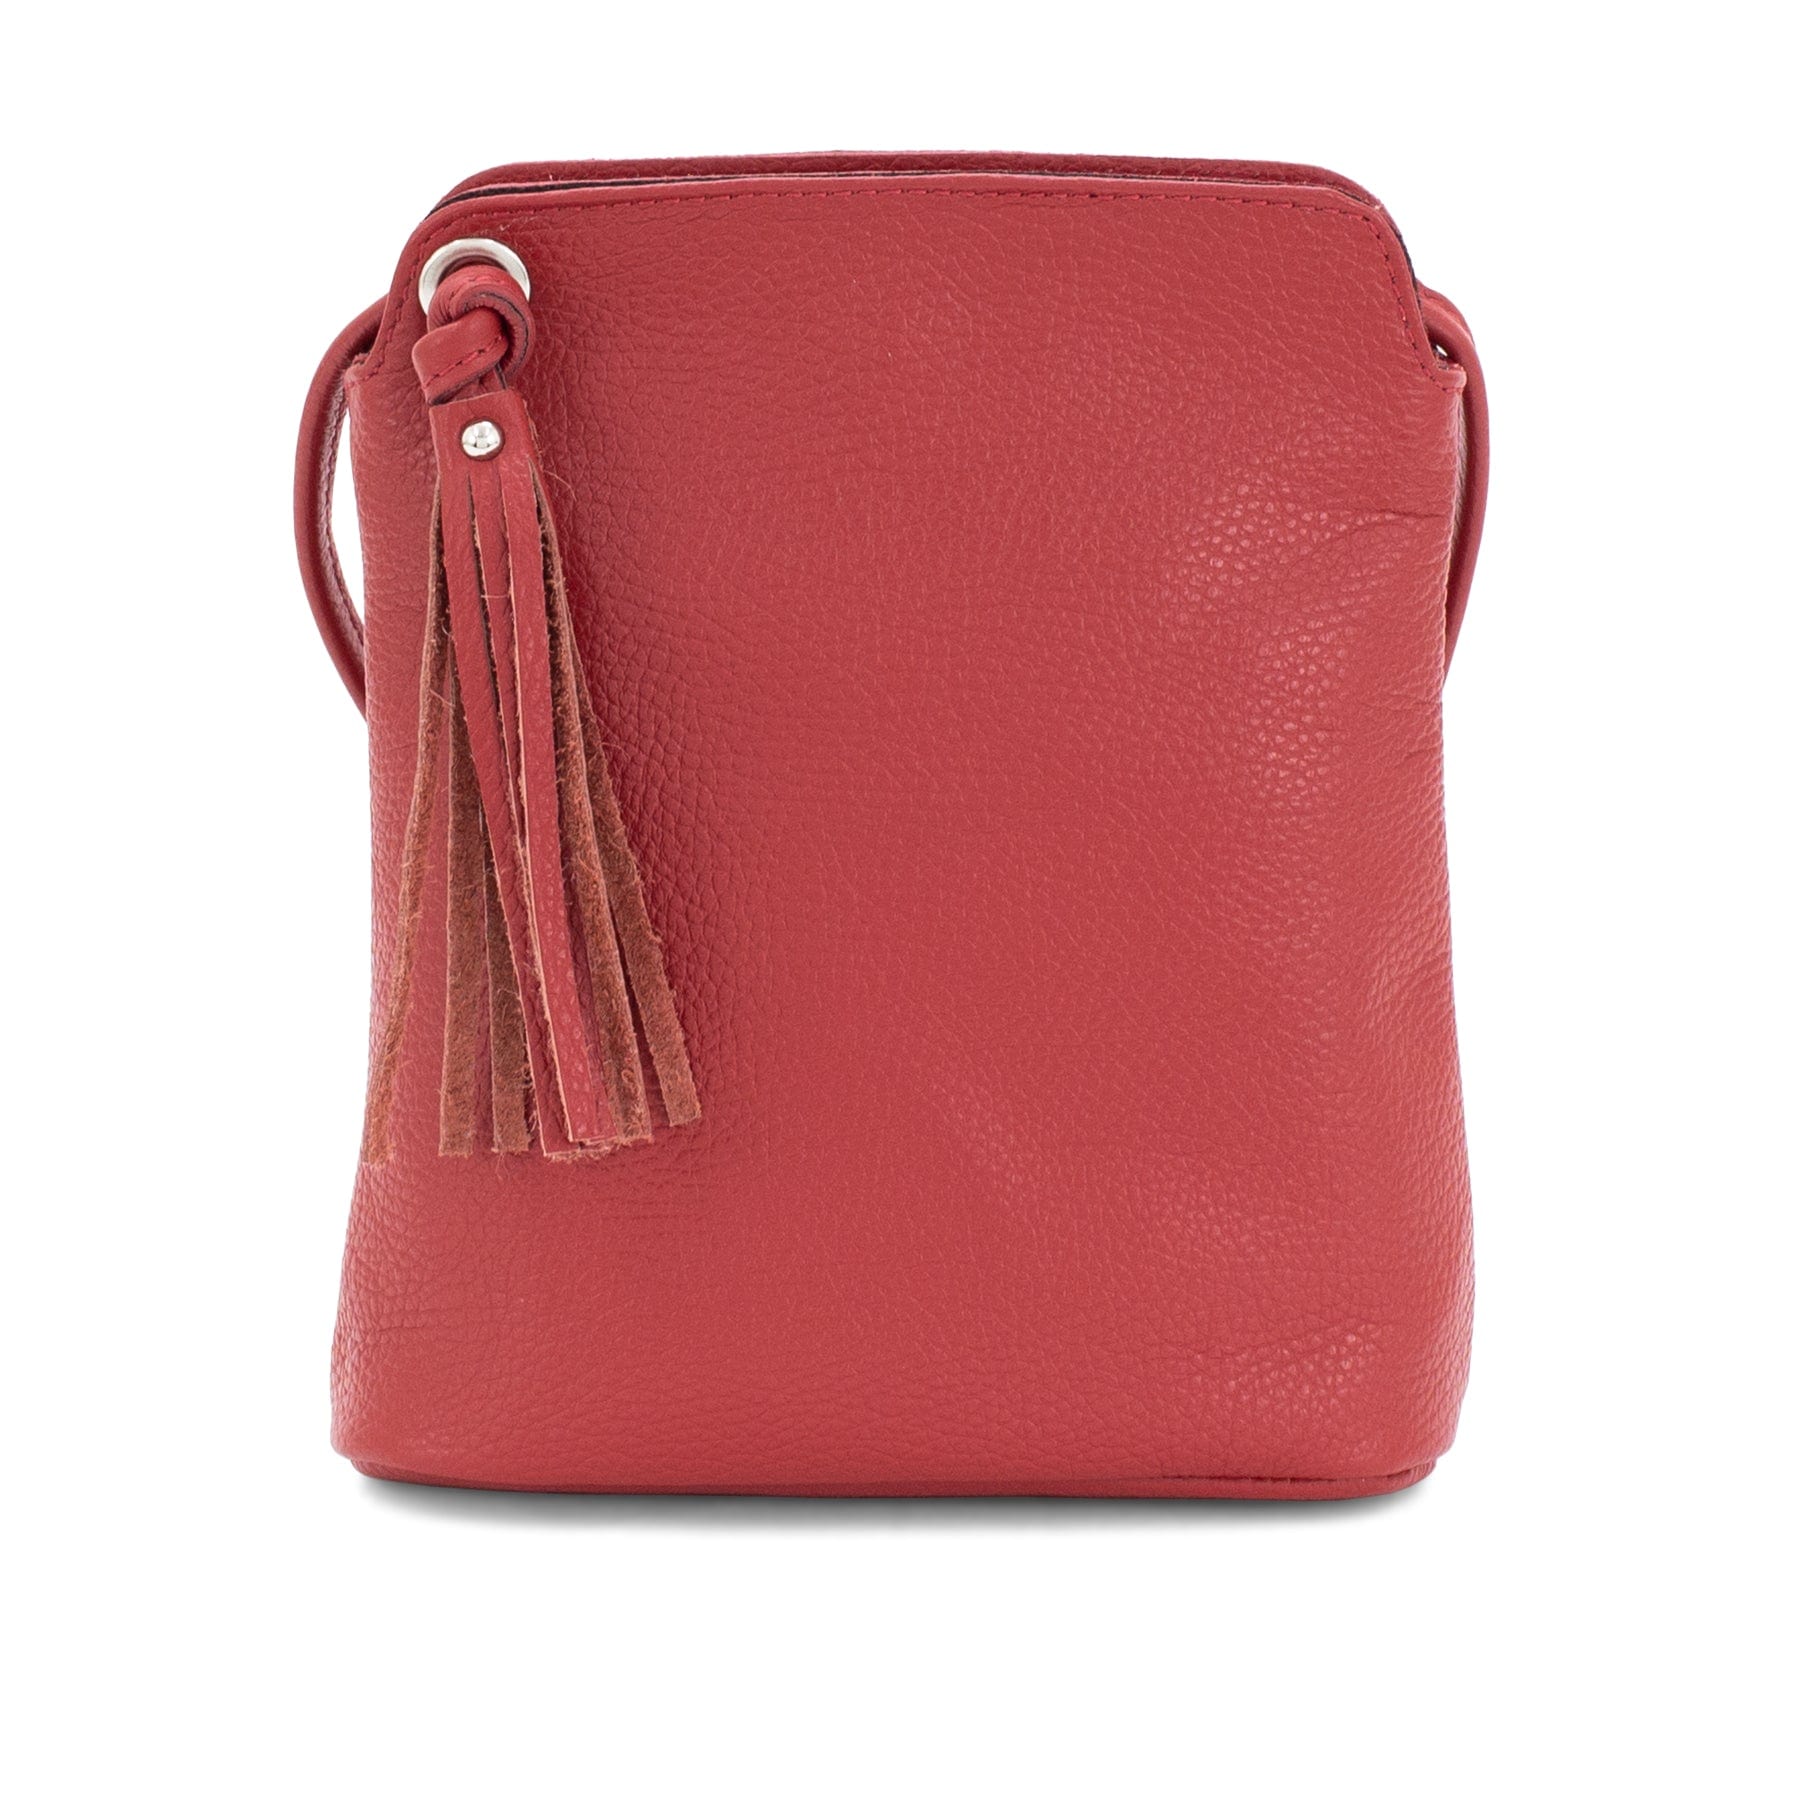 lusciousscarves Red Italian Leather Small Crossbody Bag / Handbag with Tassel , Available in 11 Colours.